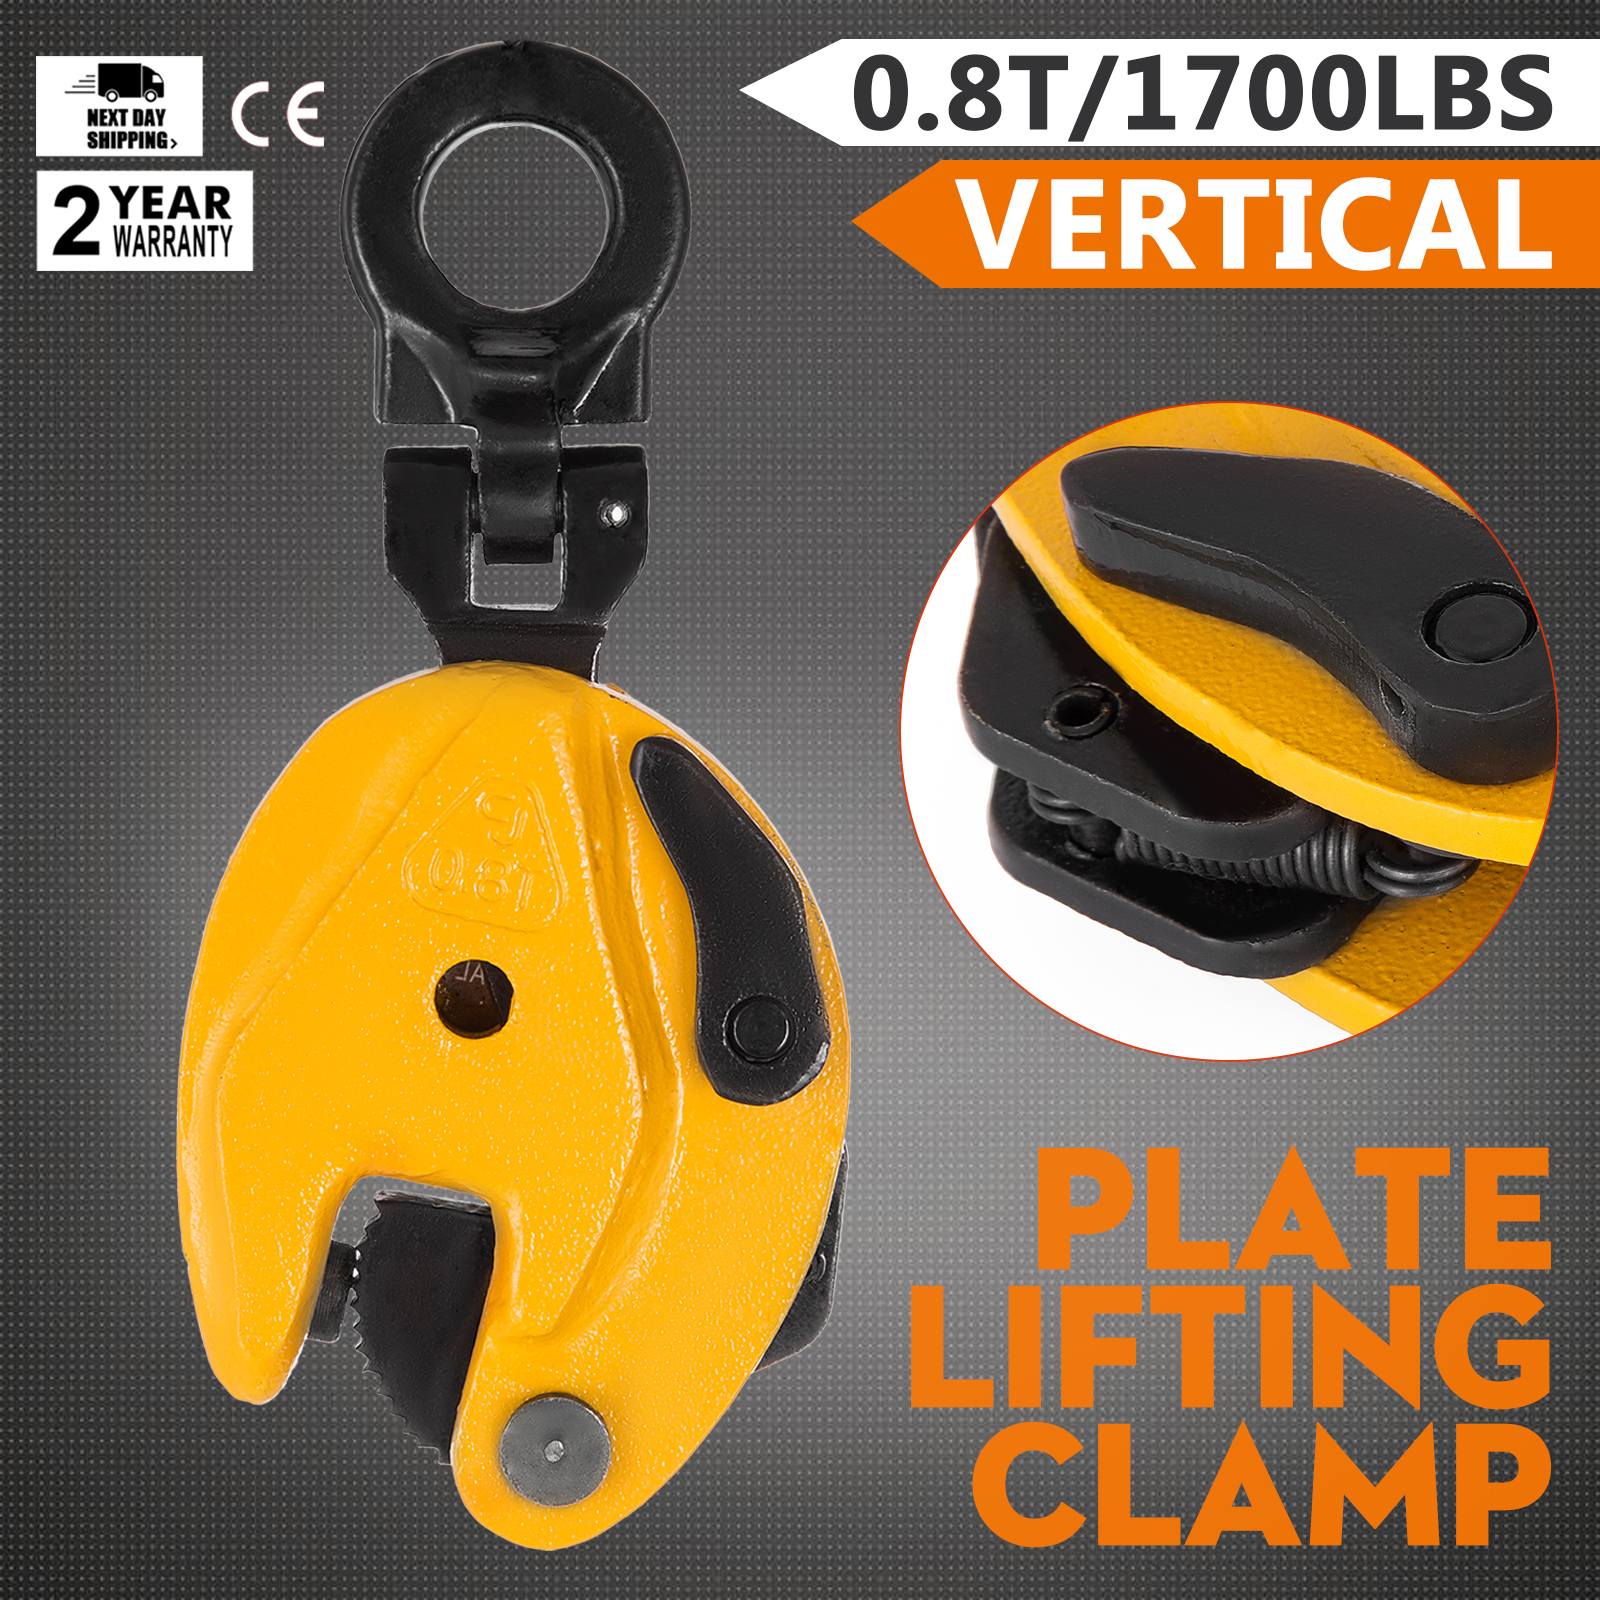 Industrail Vertical Plate Lifting Clamp Lift 0.8T/1T/2T 1760-4400lbs Capacity 